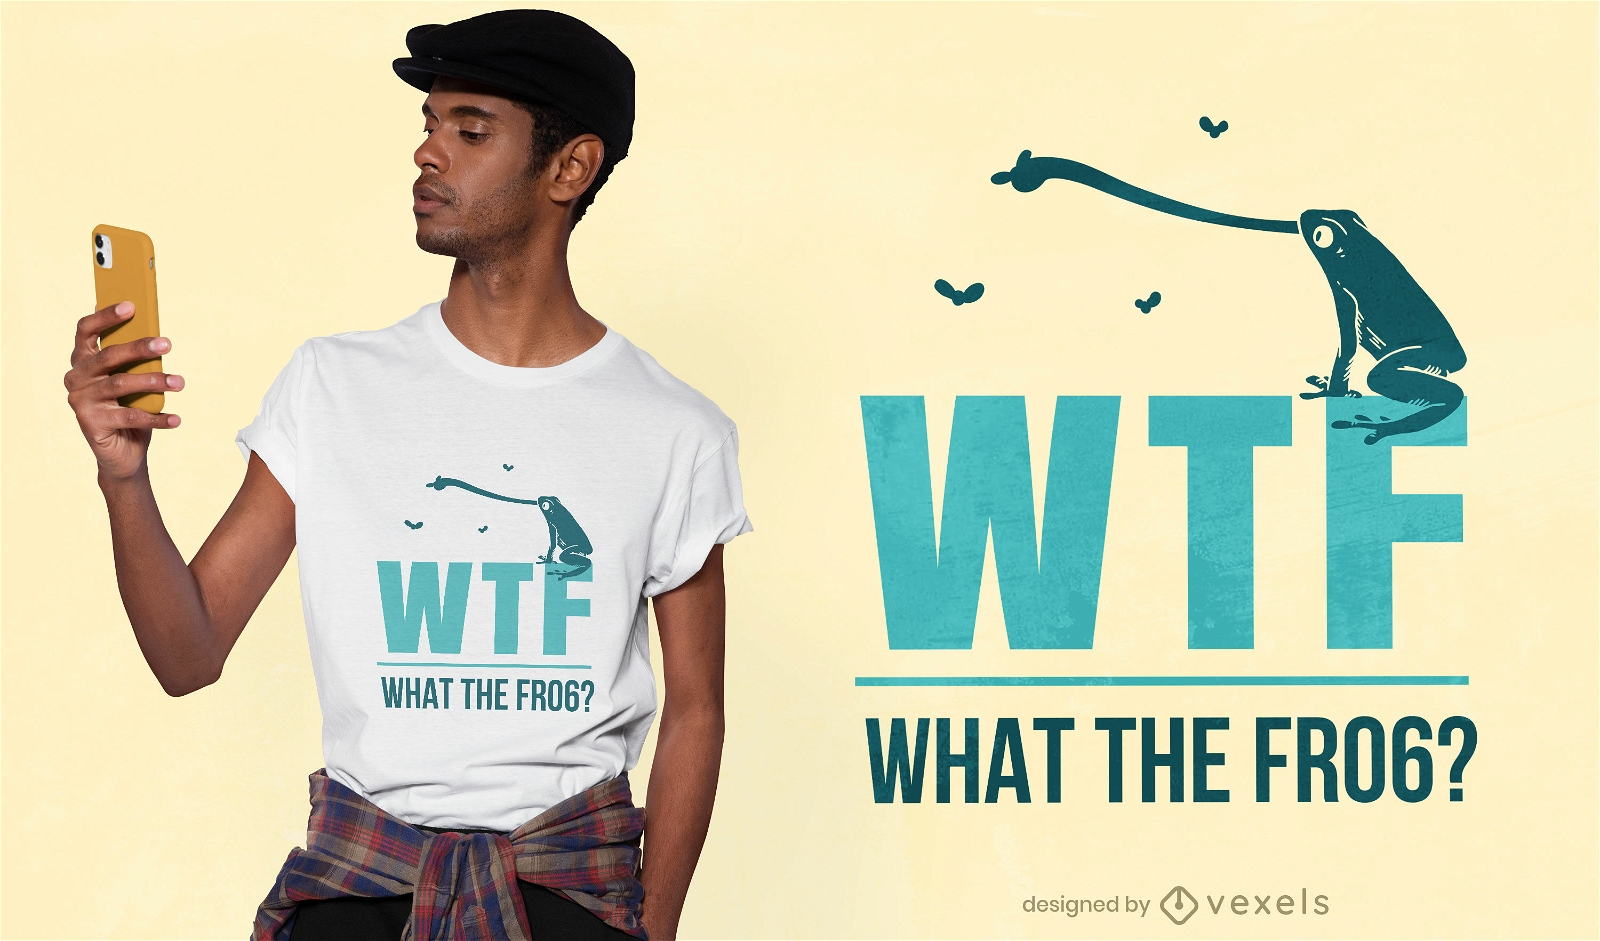 WTF What the frog t-shirt design